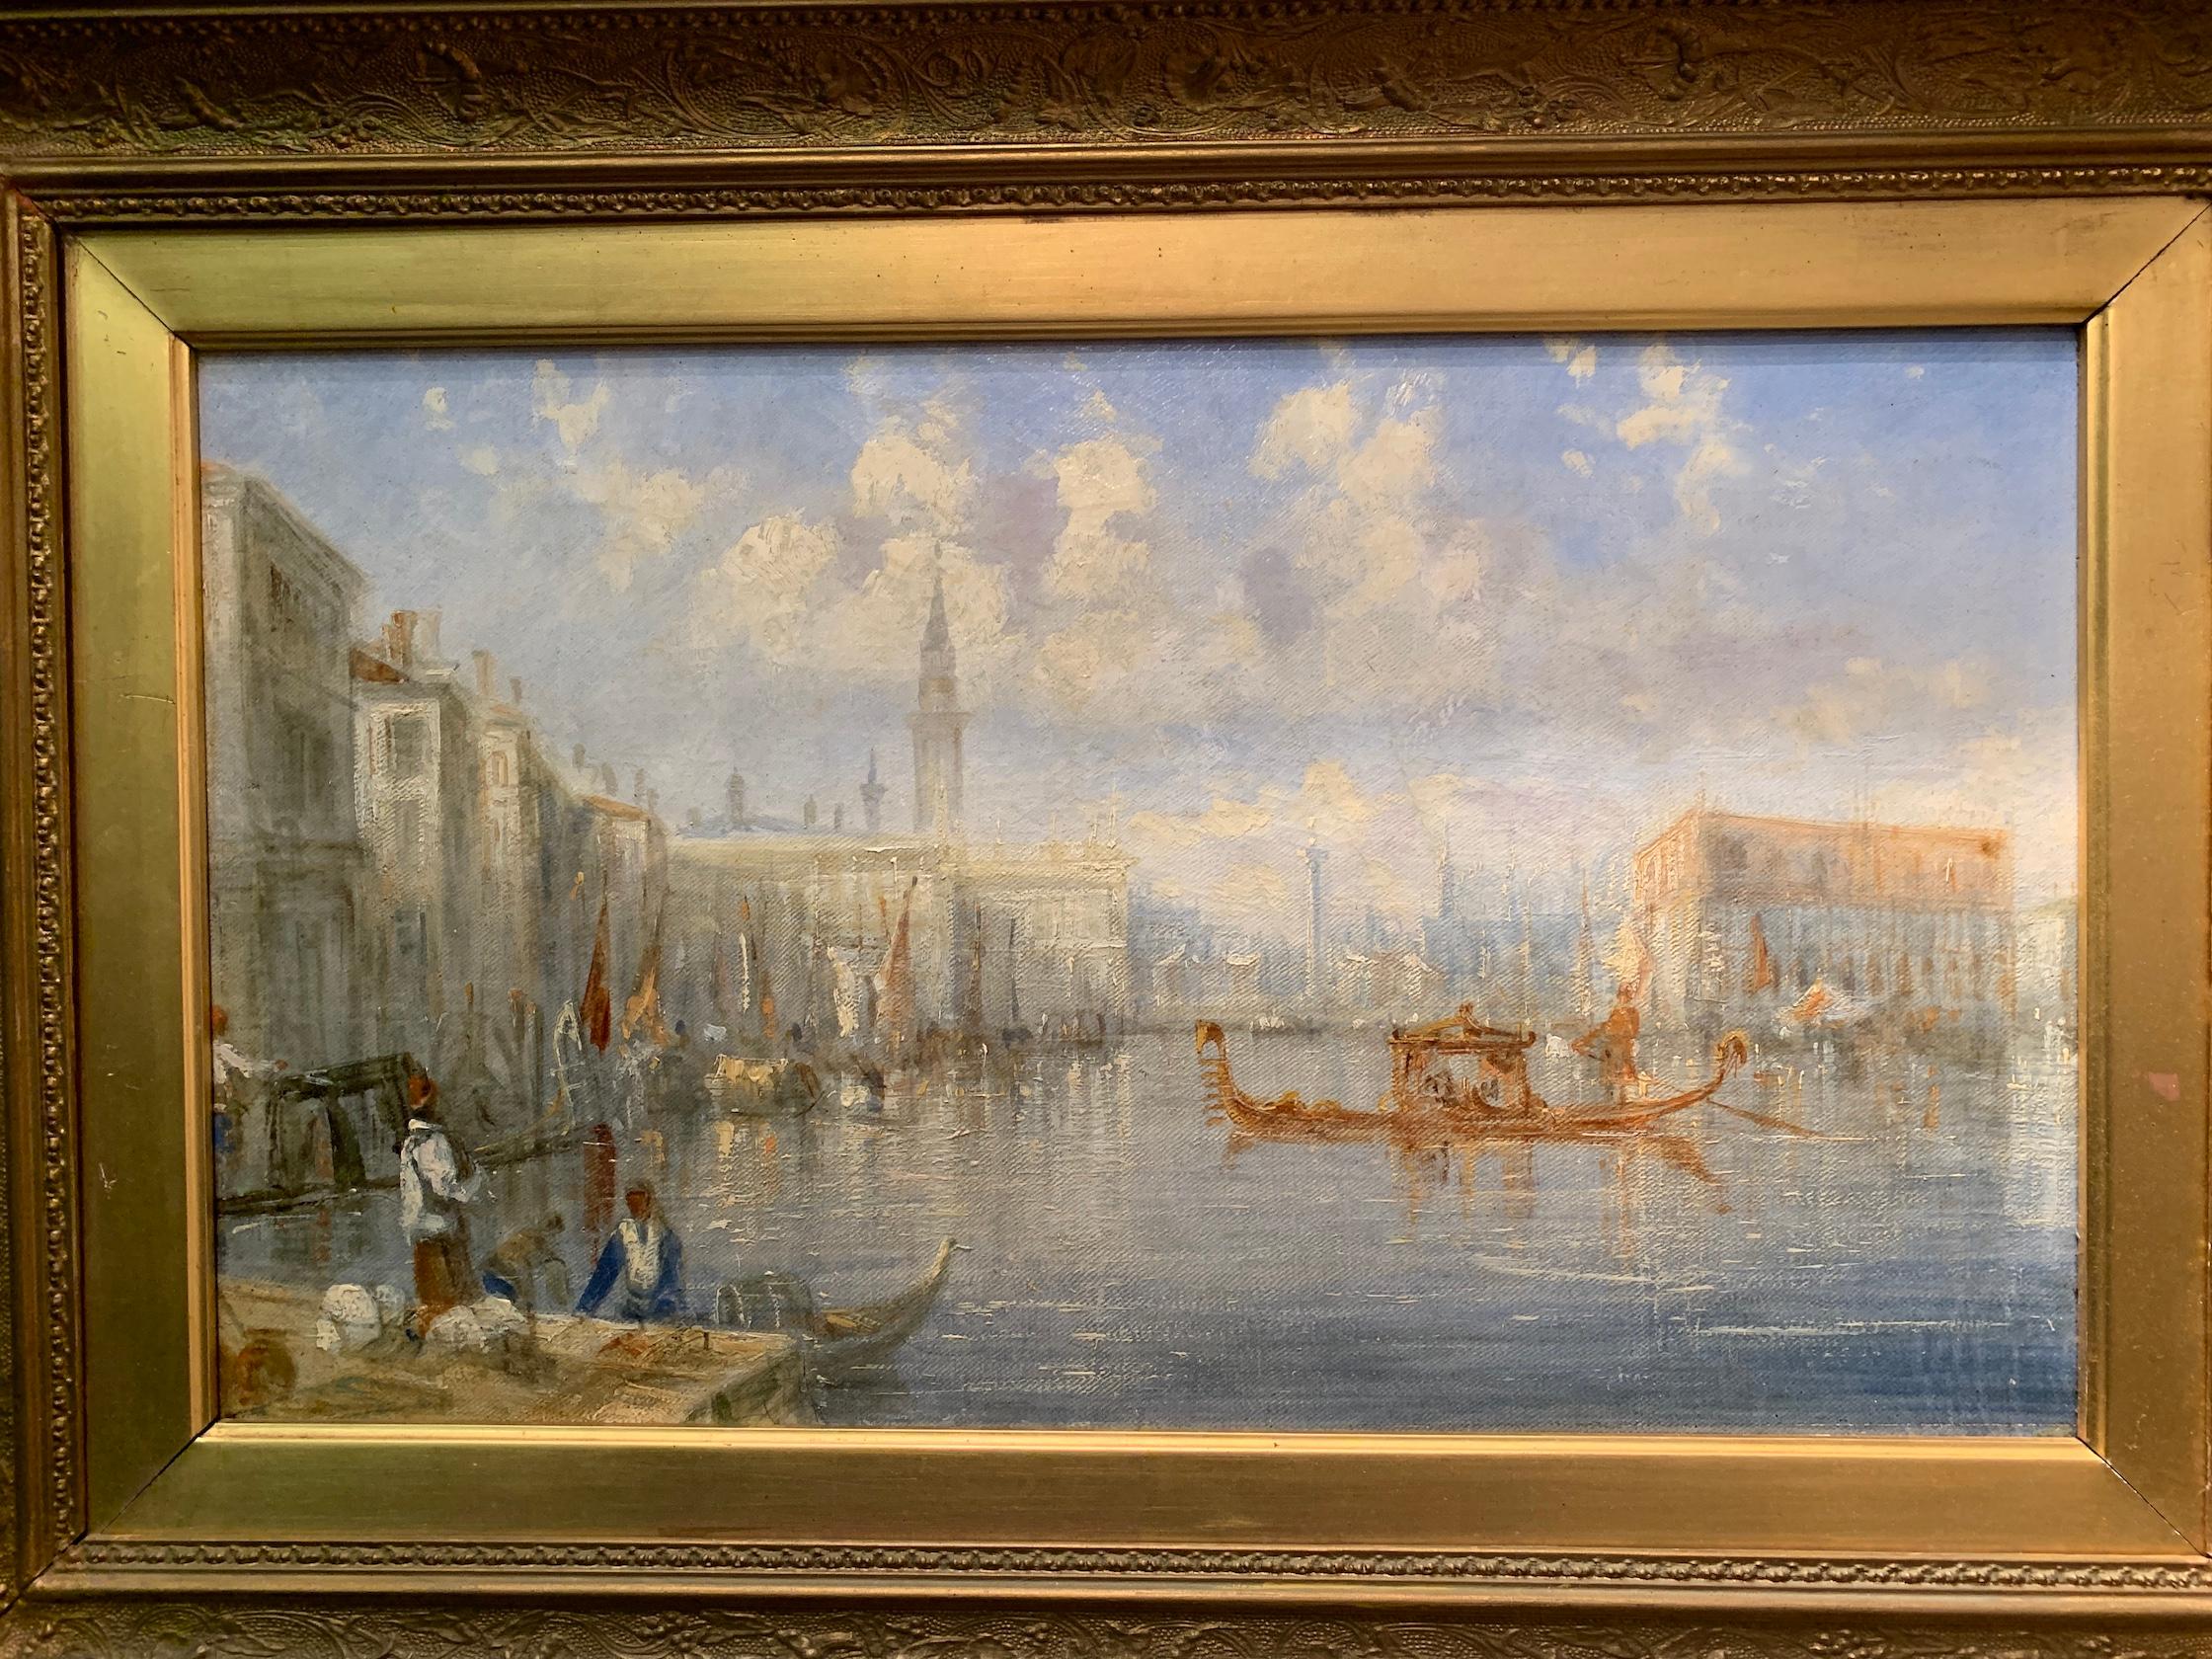 View of Venice with St. Marks and the Grand Canal (Vue de Venise avec le Grand Canal) - Angleterre du 19ème siècle - Painting de Francis Moltino